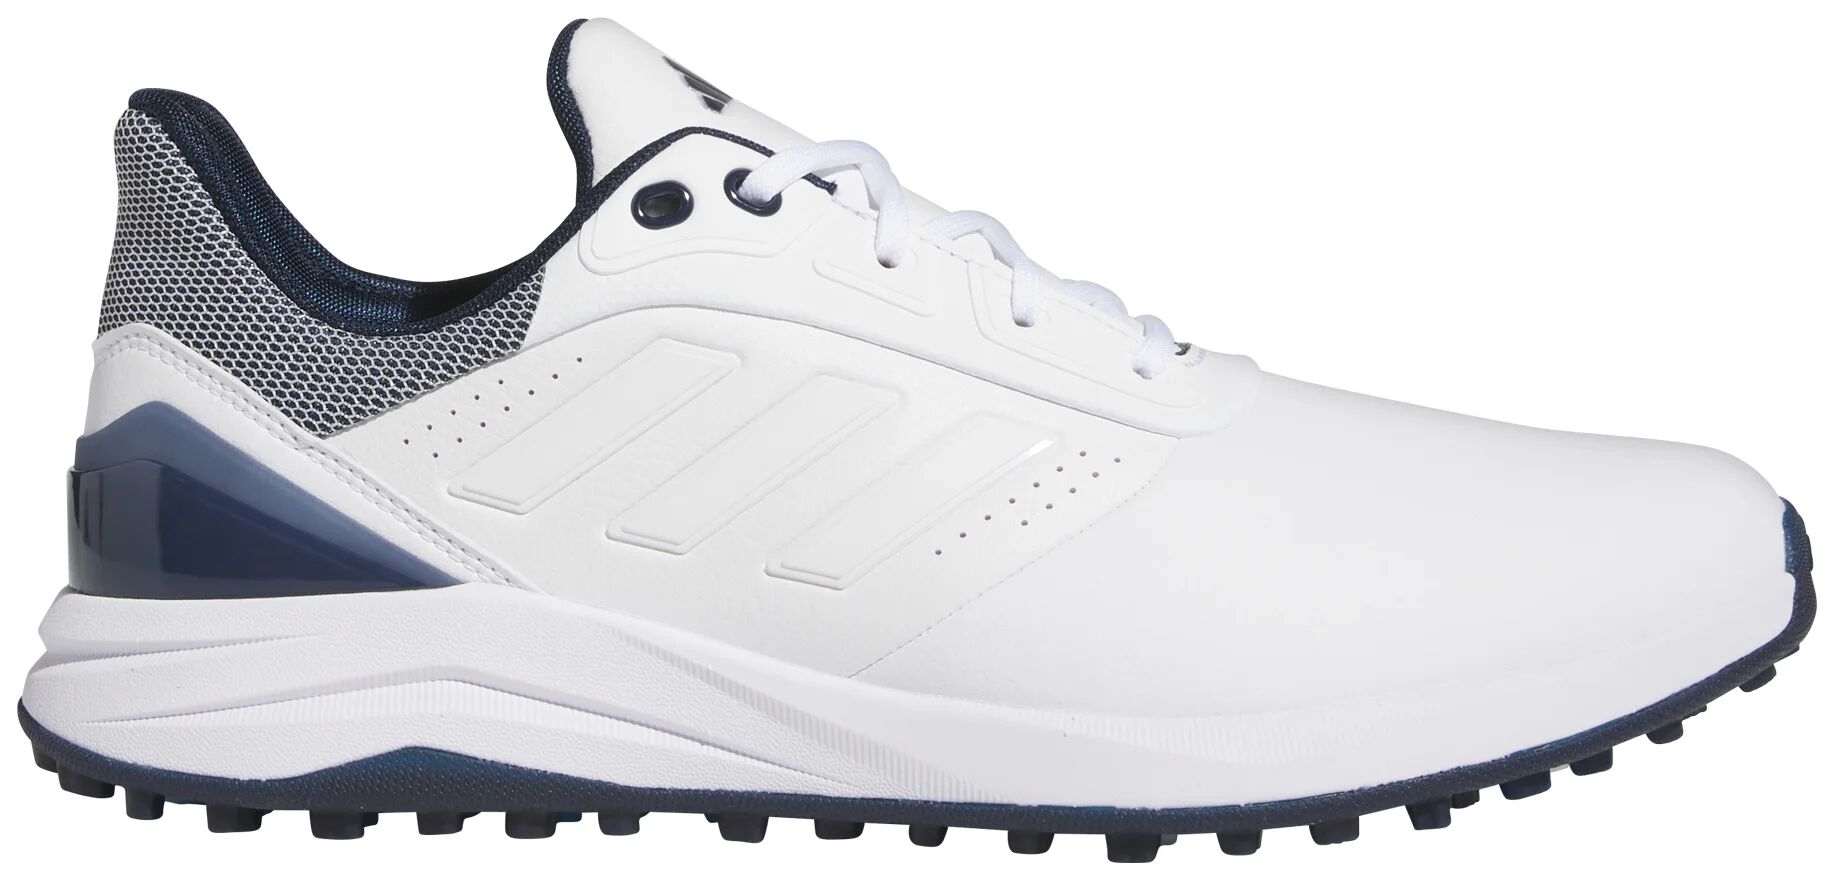 adidas Solarmotion Spikeless 24 Golf Shoes - Cloud White/Cloud White/Preloved Ink - 11 - MEDIUM